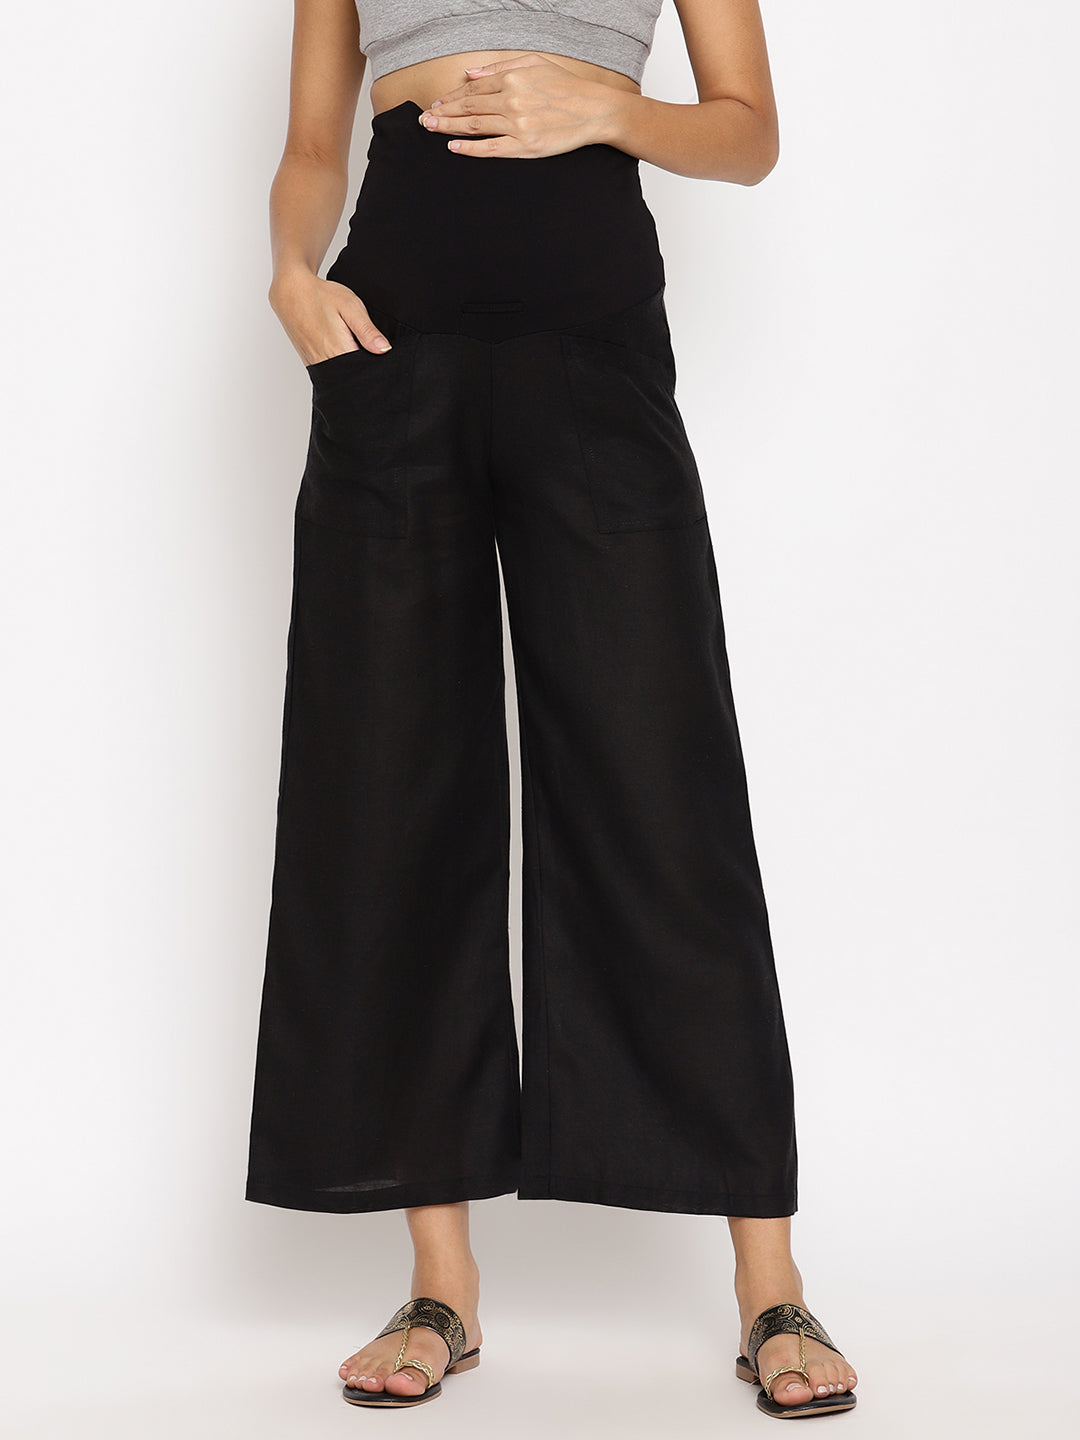 Buy Wide Leg Pants High Waisted Pants Palazzo Pants Cotton Online in India   Etsy